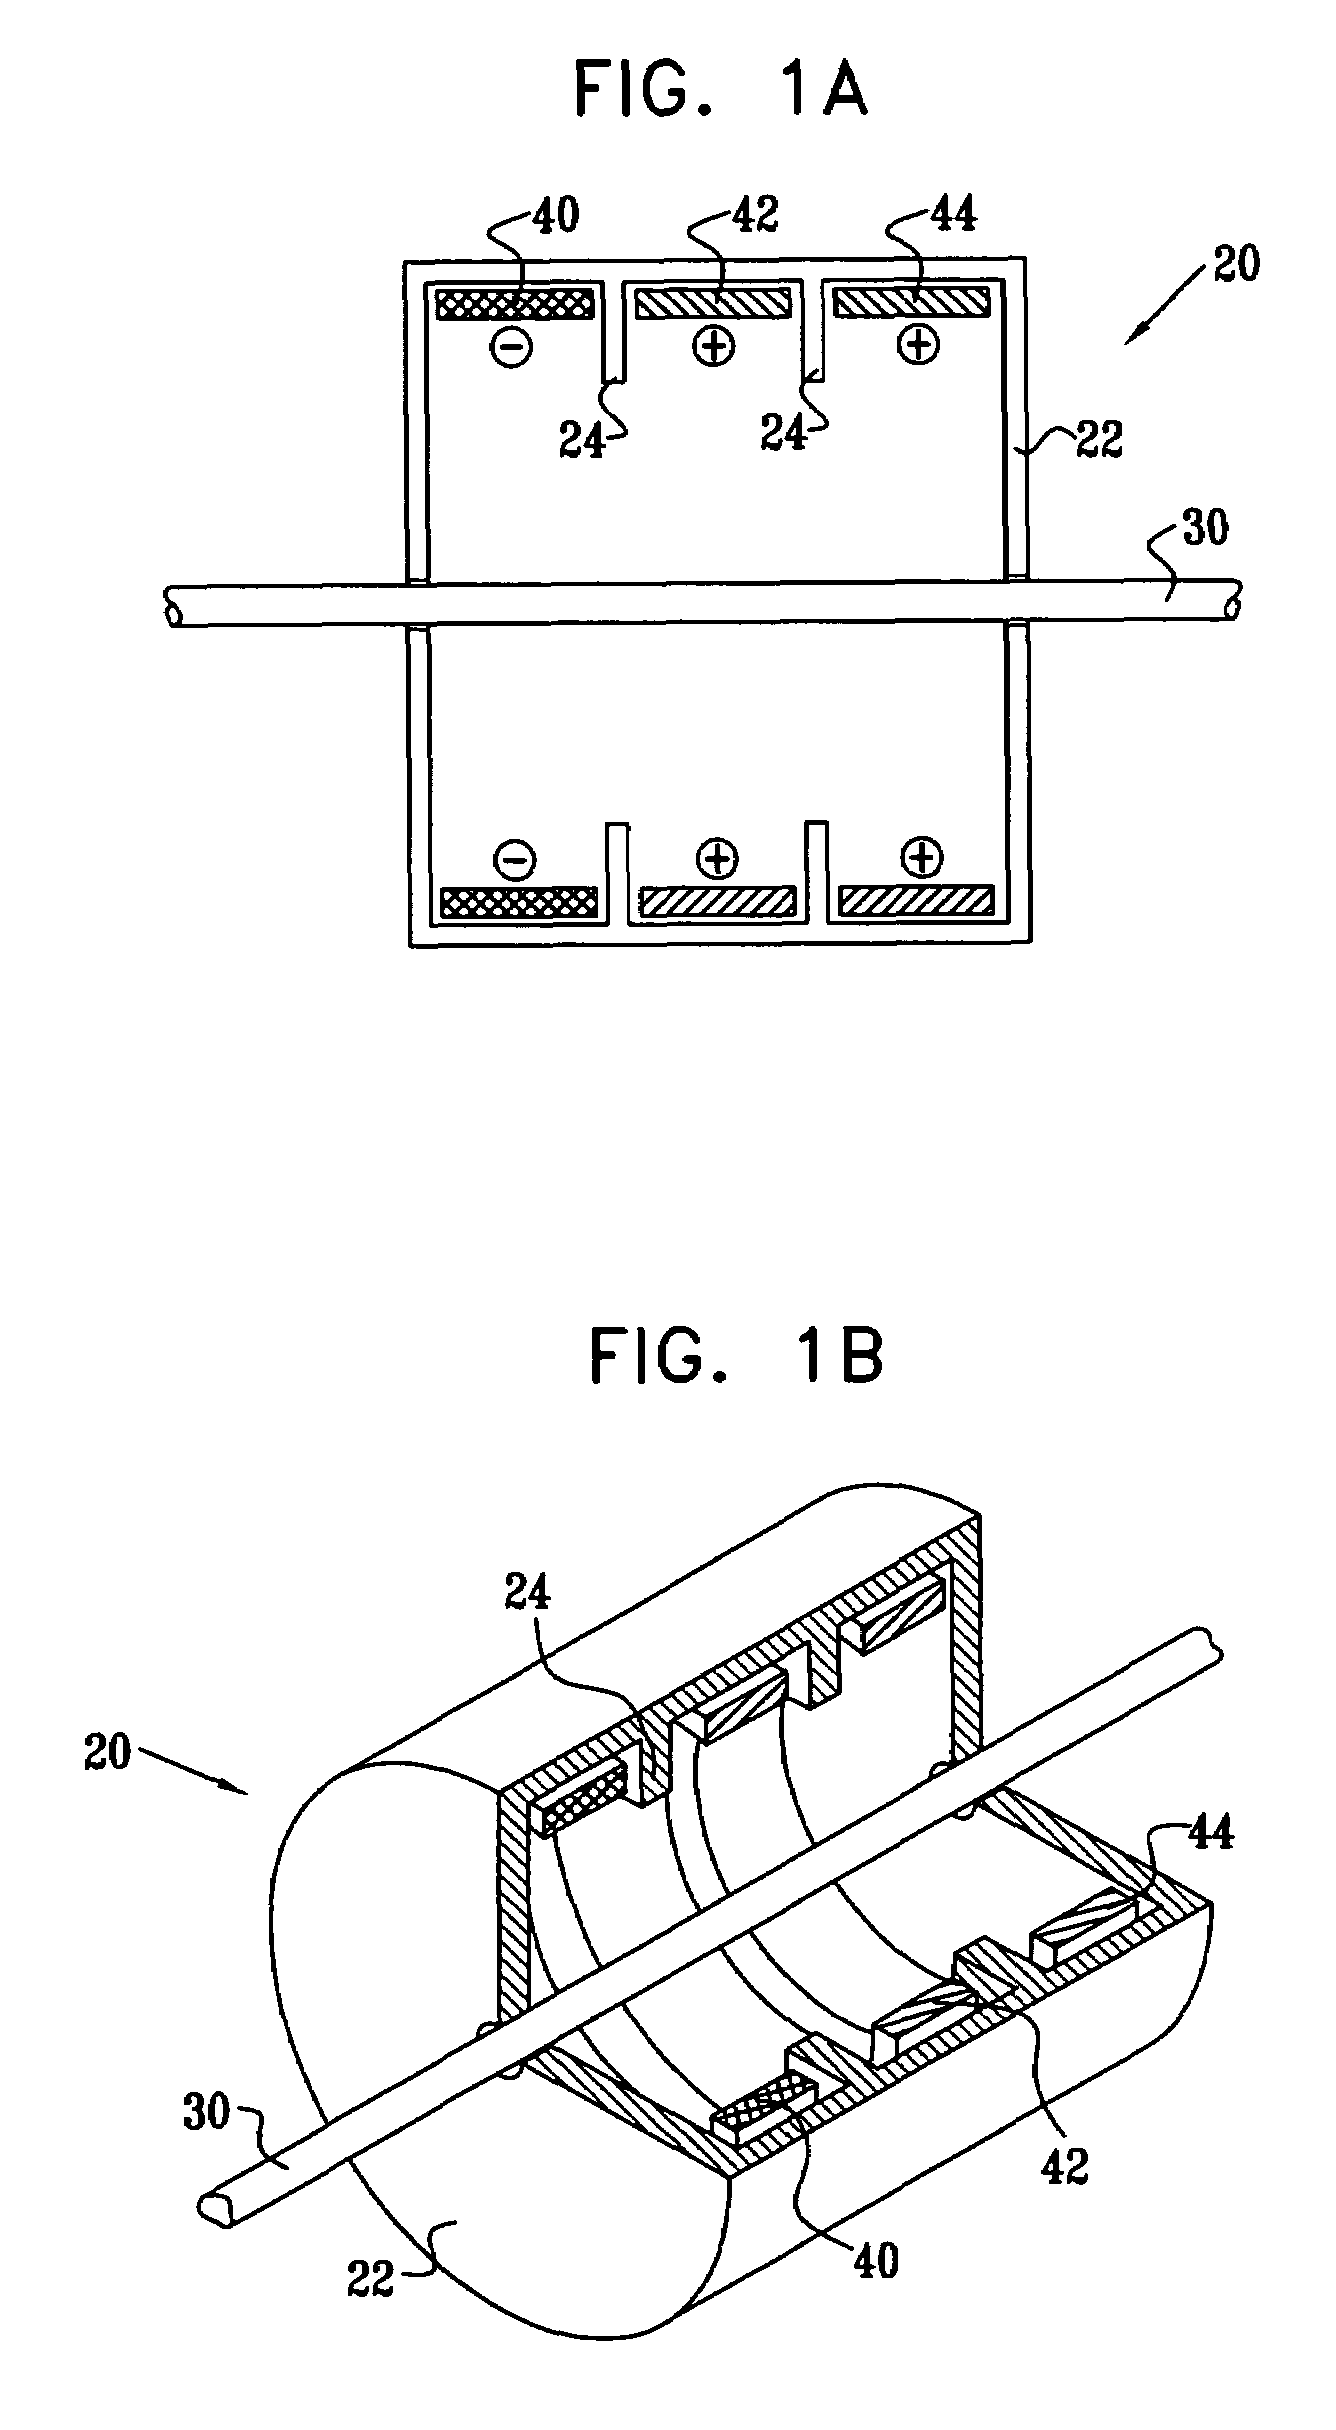 Construction of electrode assembly for nerve control